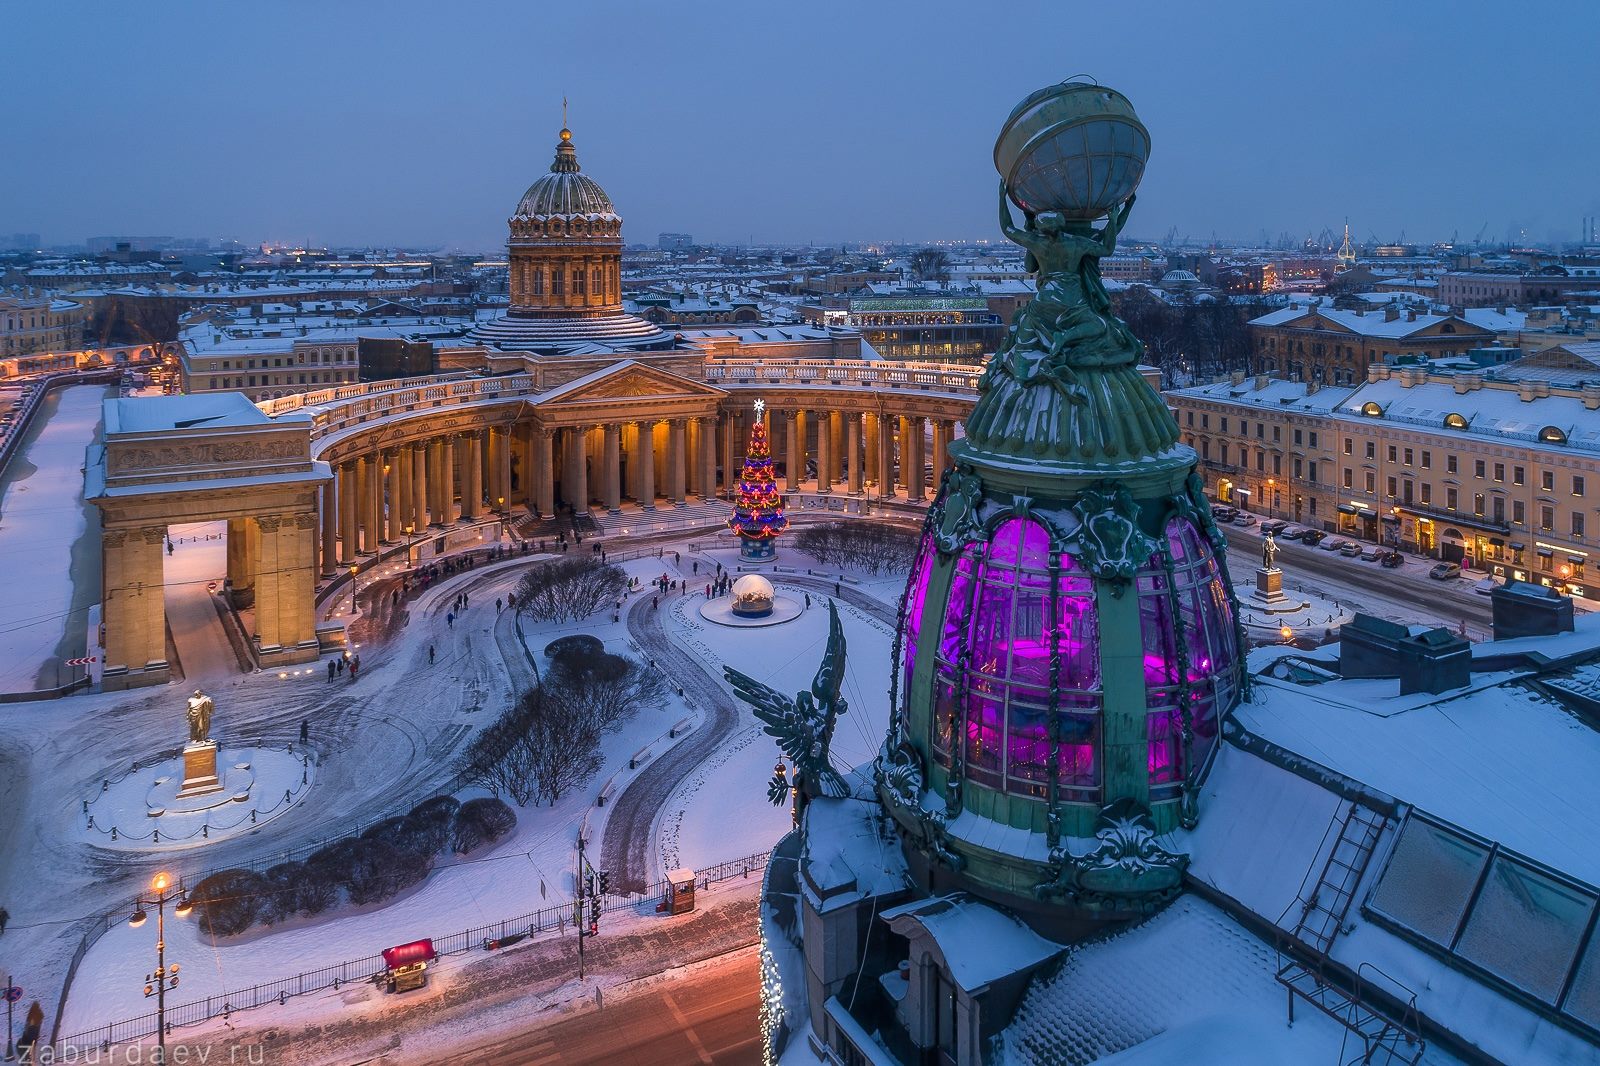 Singer house and Kazan Cathedral in winter